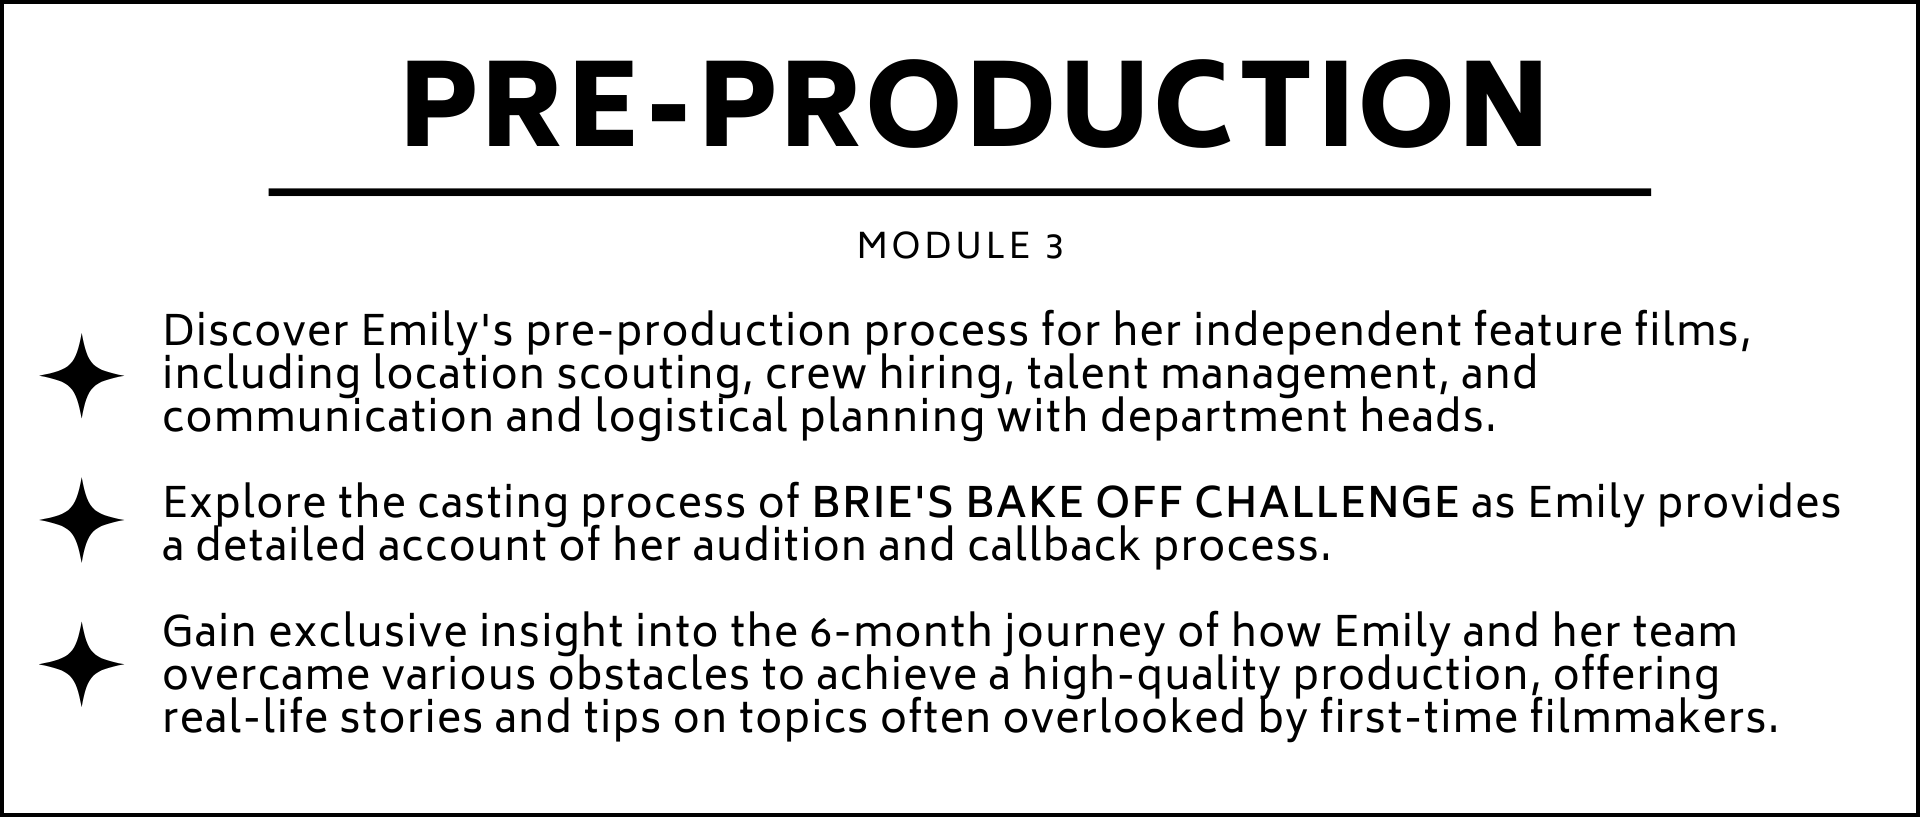 Discover Emilys pre-production process for her independent feature films, including location scouting, crew hiring, talent management, and communication and logistical planning with department heads.  Explore the casting process of BRIES BAKE OFF CHALLENGE as Emily provides a detailed account of her audition and callback process.  Gain exclusive insight into the 6-month journey of how Emily and her team overcame various obstacles to achieve a high-quality production, offering  real-life stories and tips on topics often overlooked by first-time filmmakers.